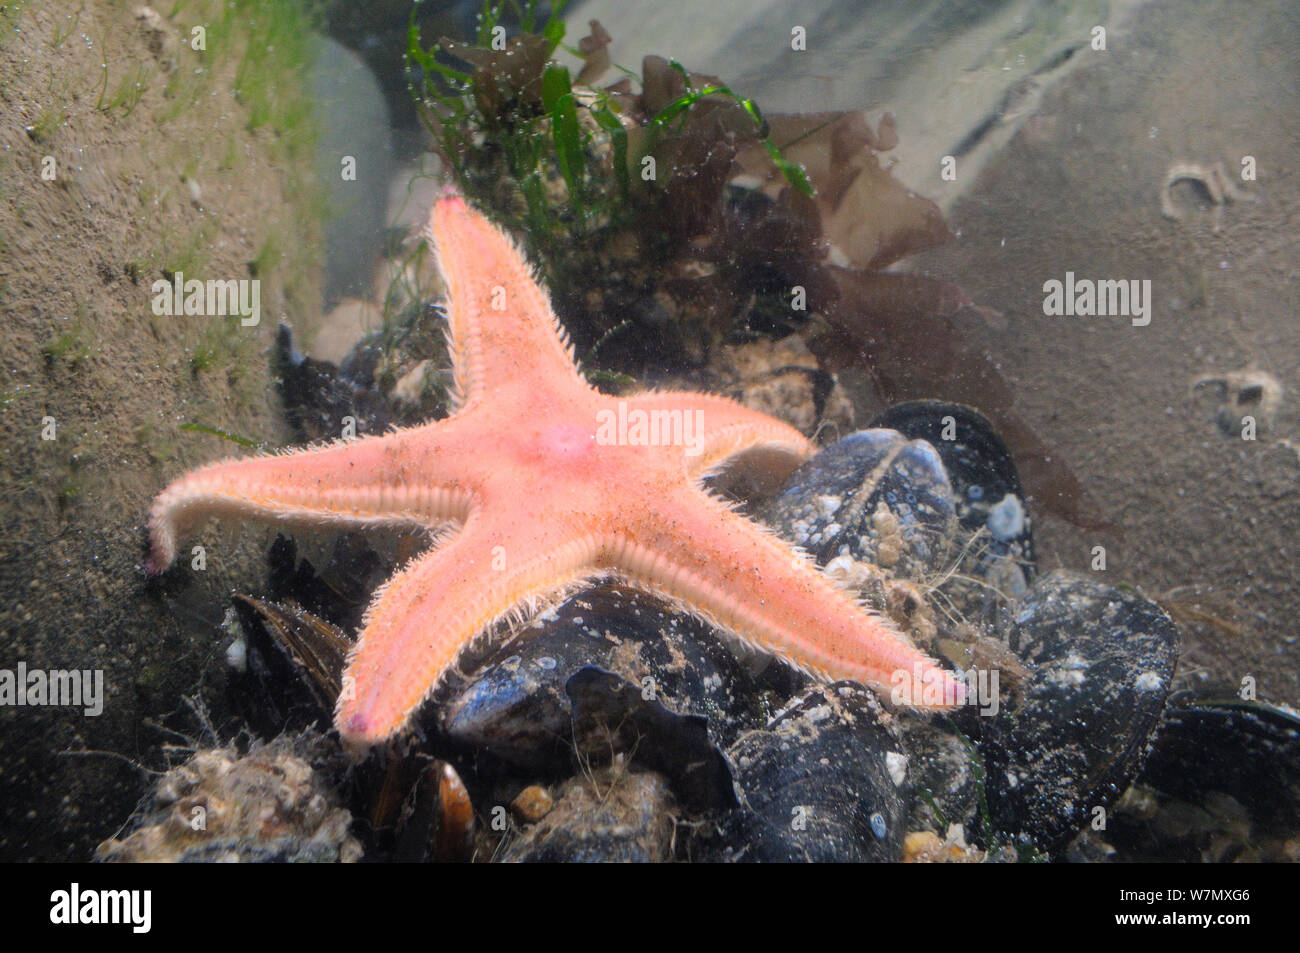 Spiny comb starfish / Sand star (Astropecten irregularis), inspecting Common mussels (Mytilus edulis) after being washed into a rockpool during a storm, St.Bees, Cumbria, UK, July. Stock Photo